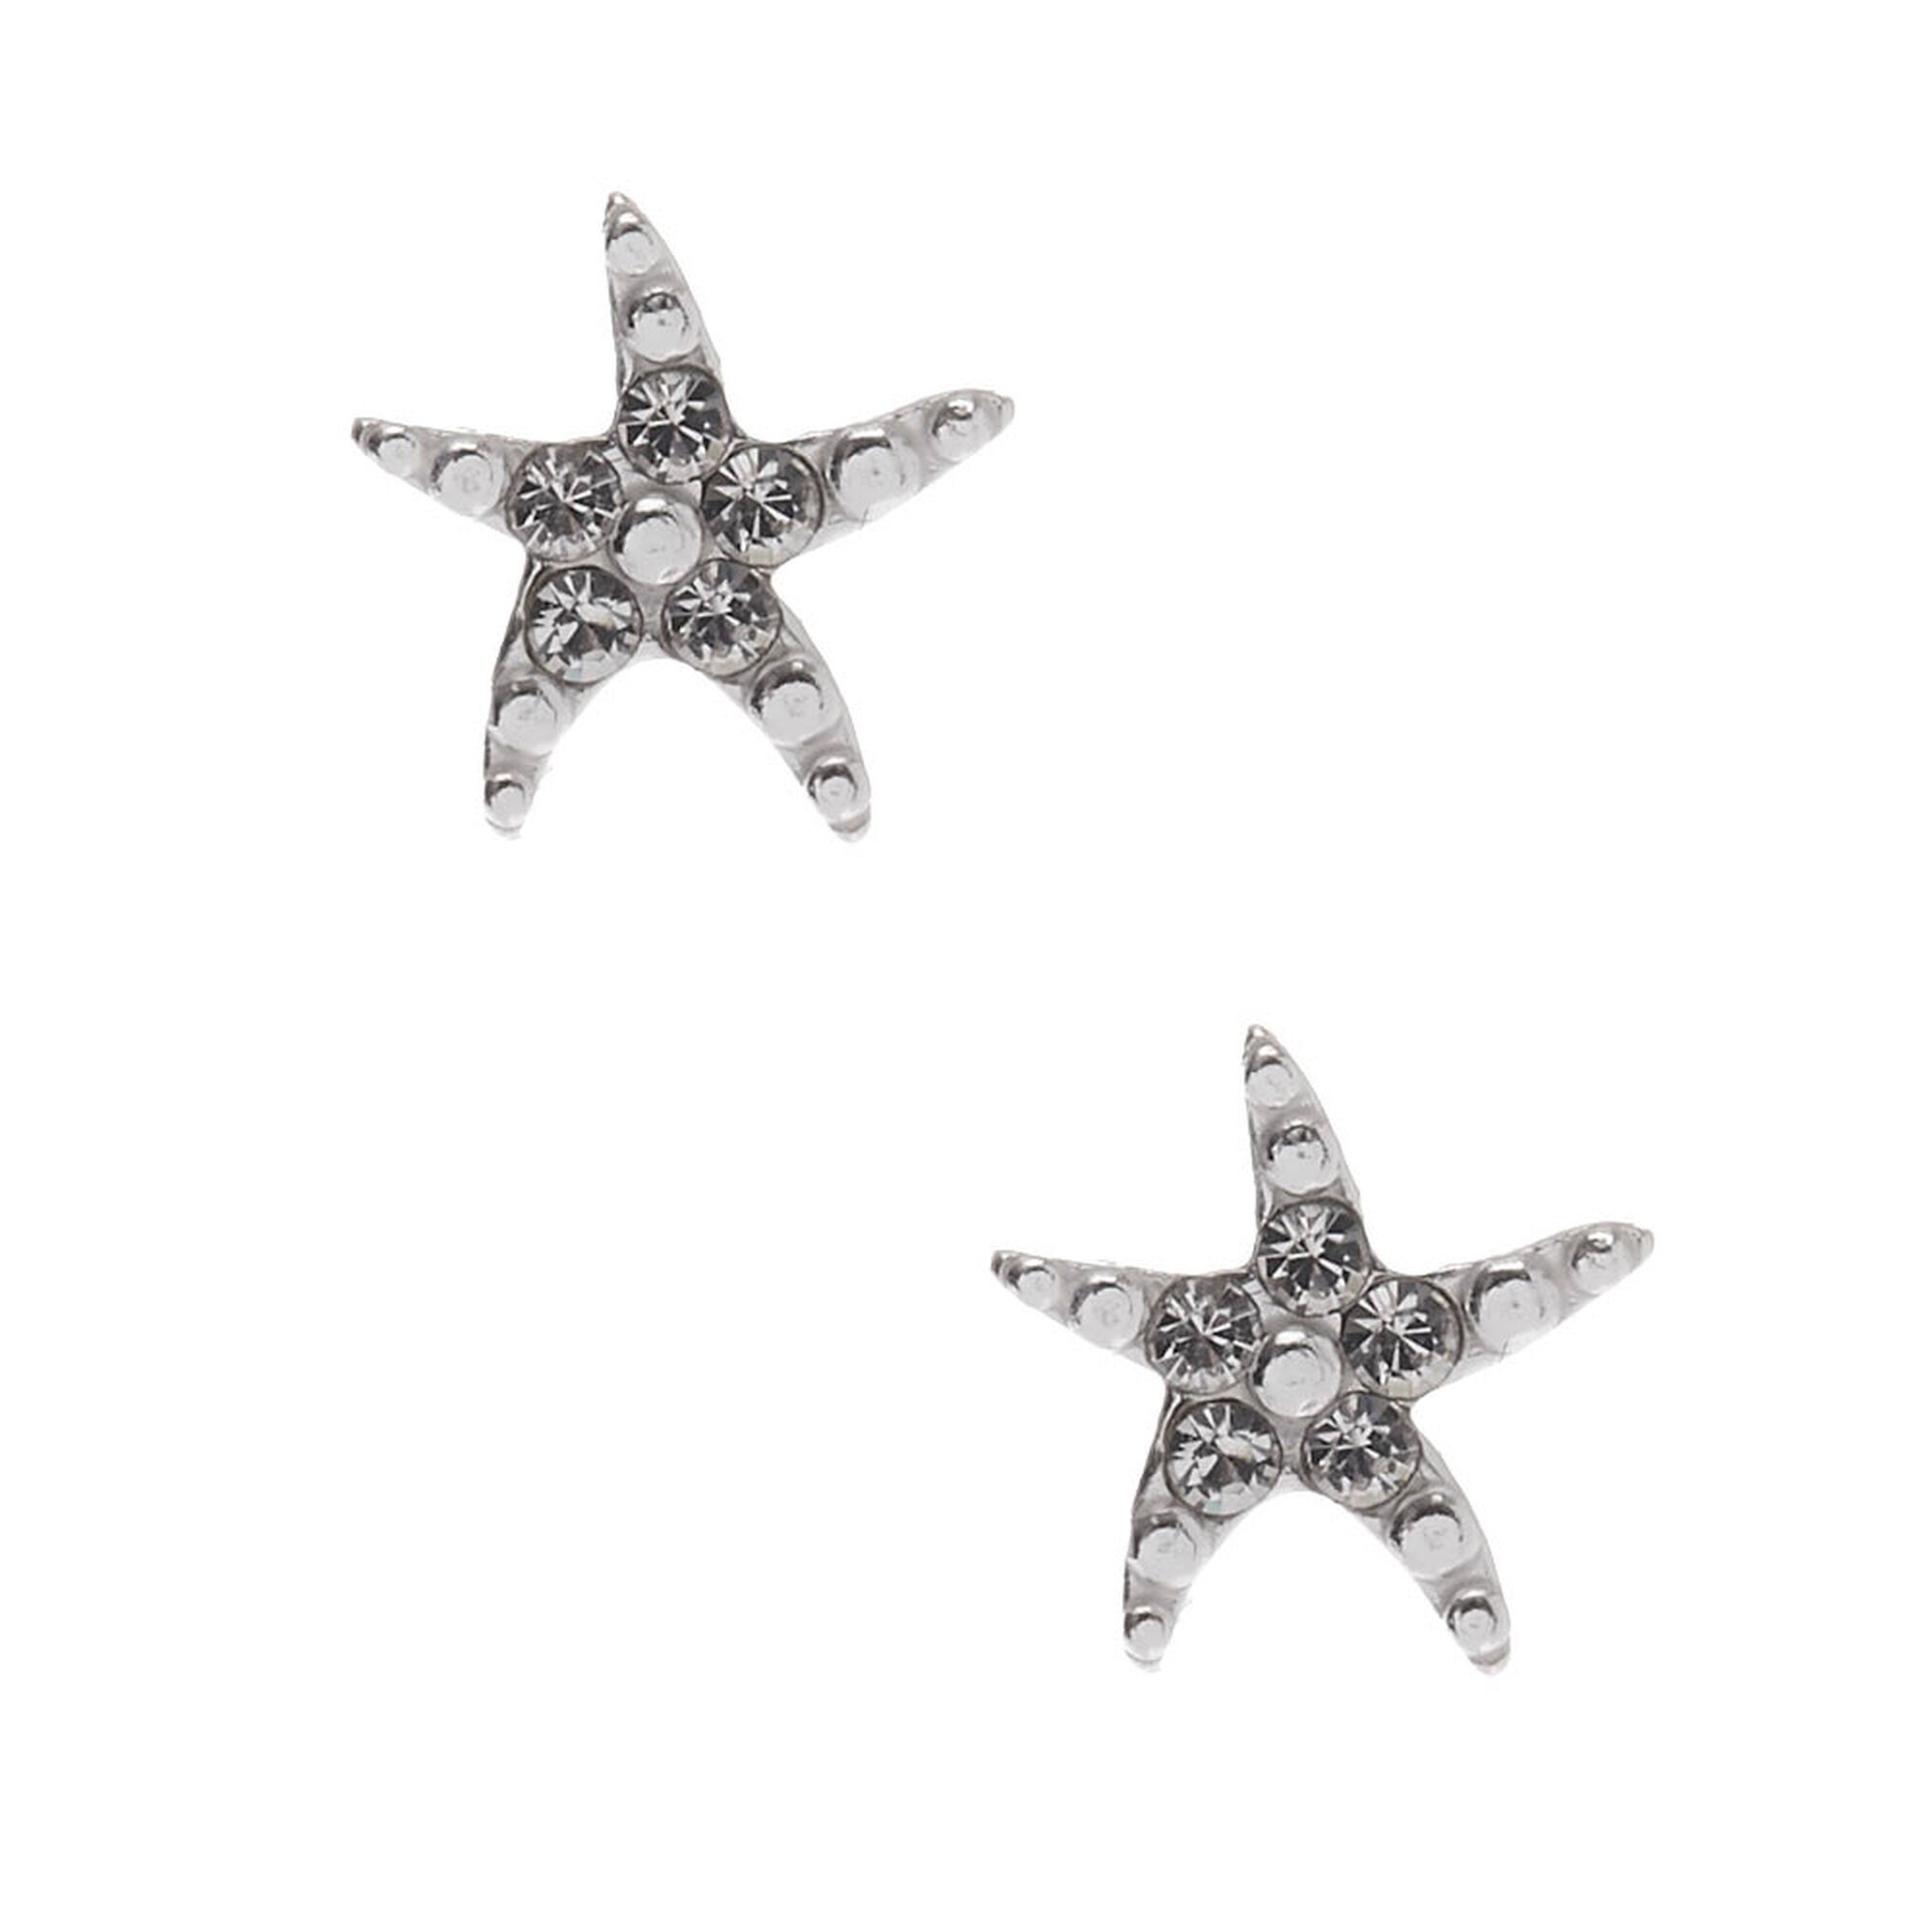 View Claires Crystal Starfish Stud Earrings Silver information